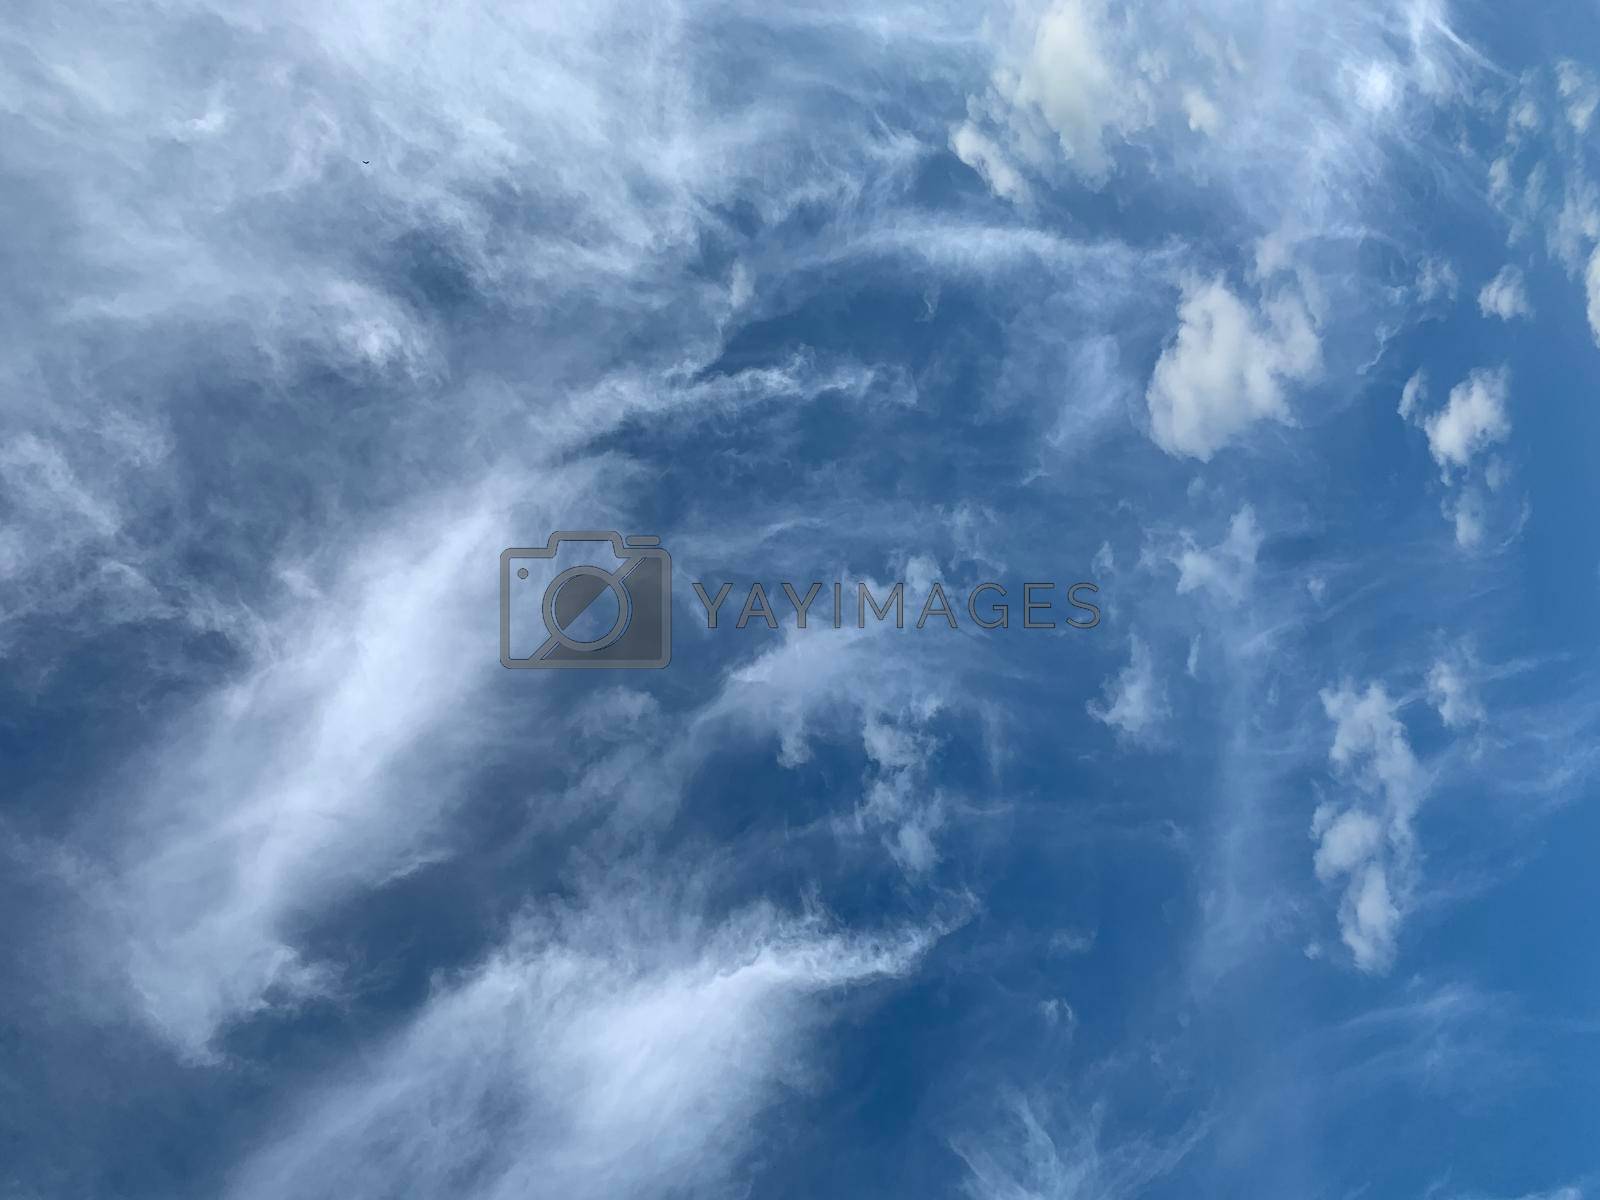 Royalty free image of Sky and cloud for background sunset or sunrise by Olena_Mykhailenko